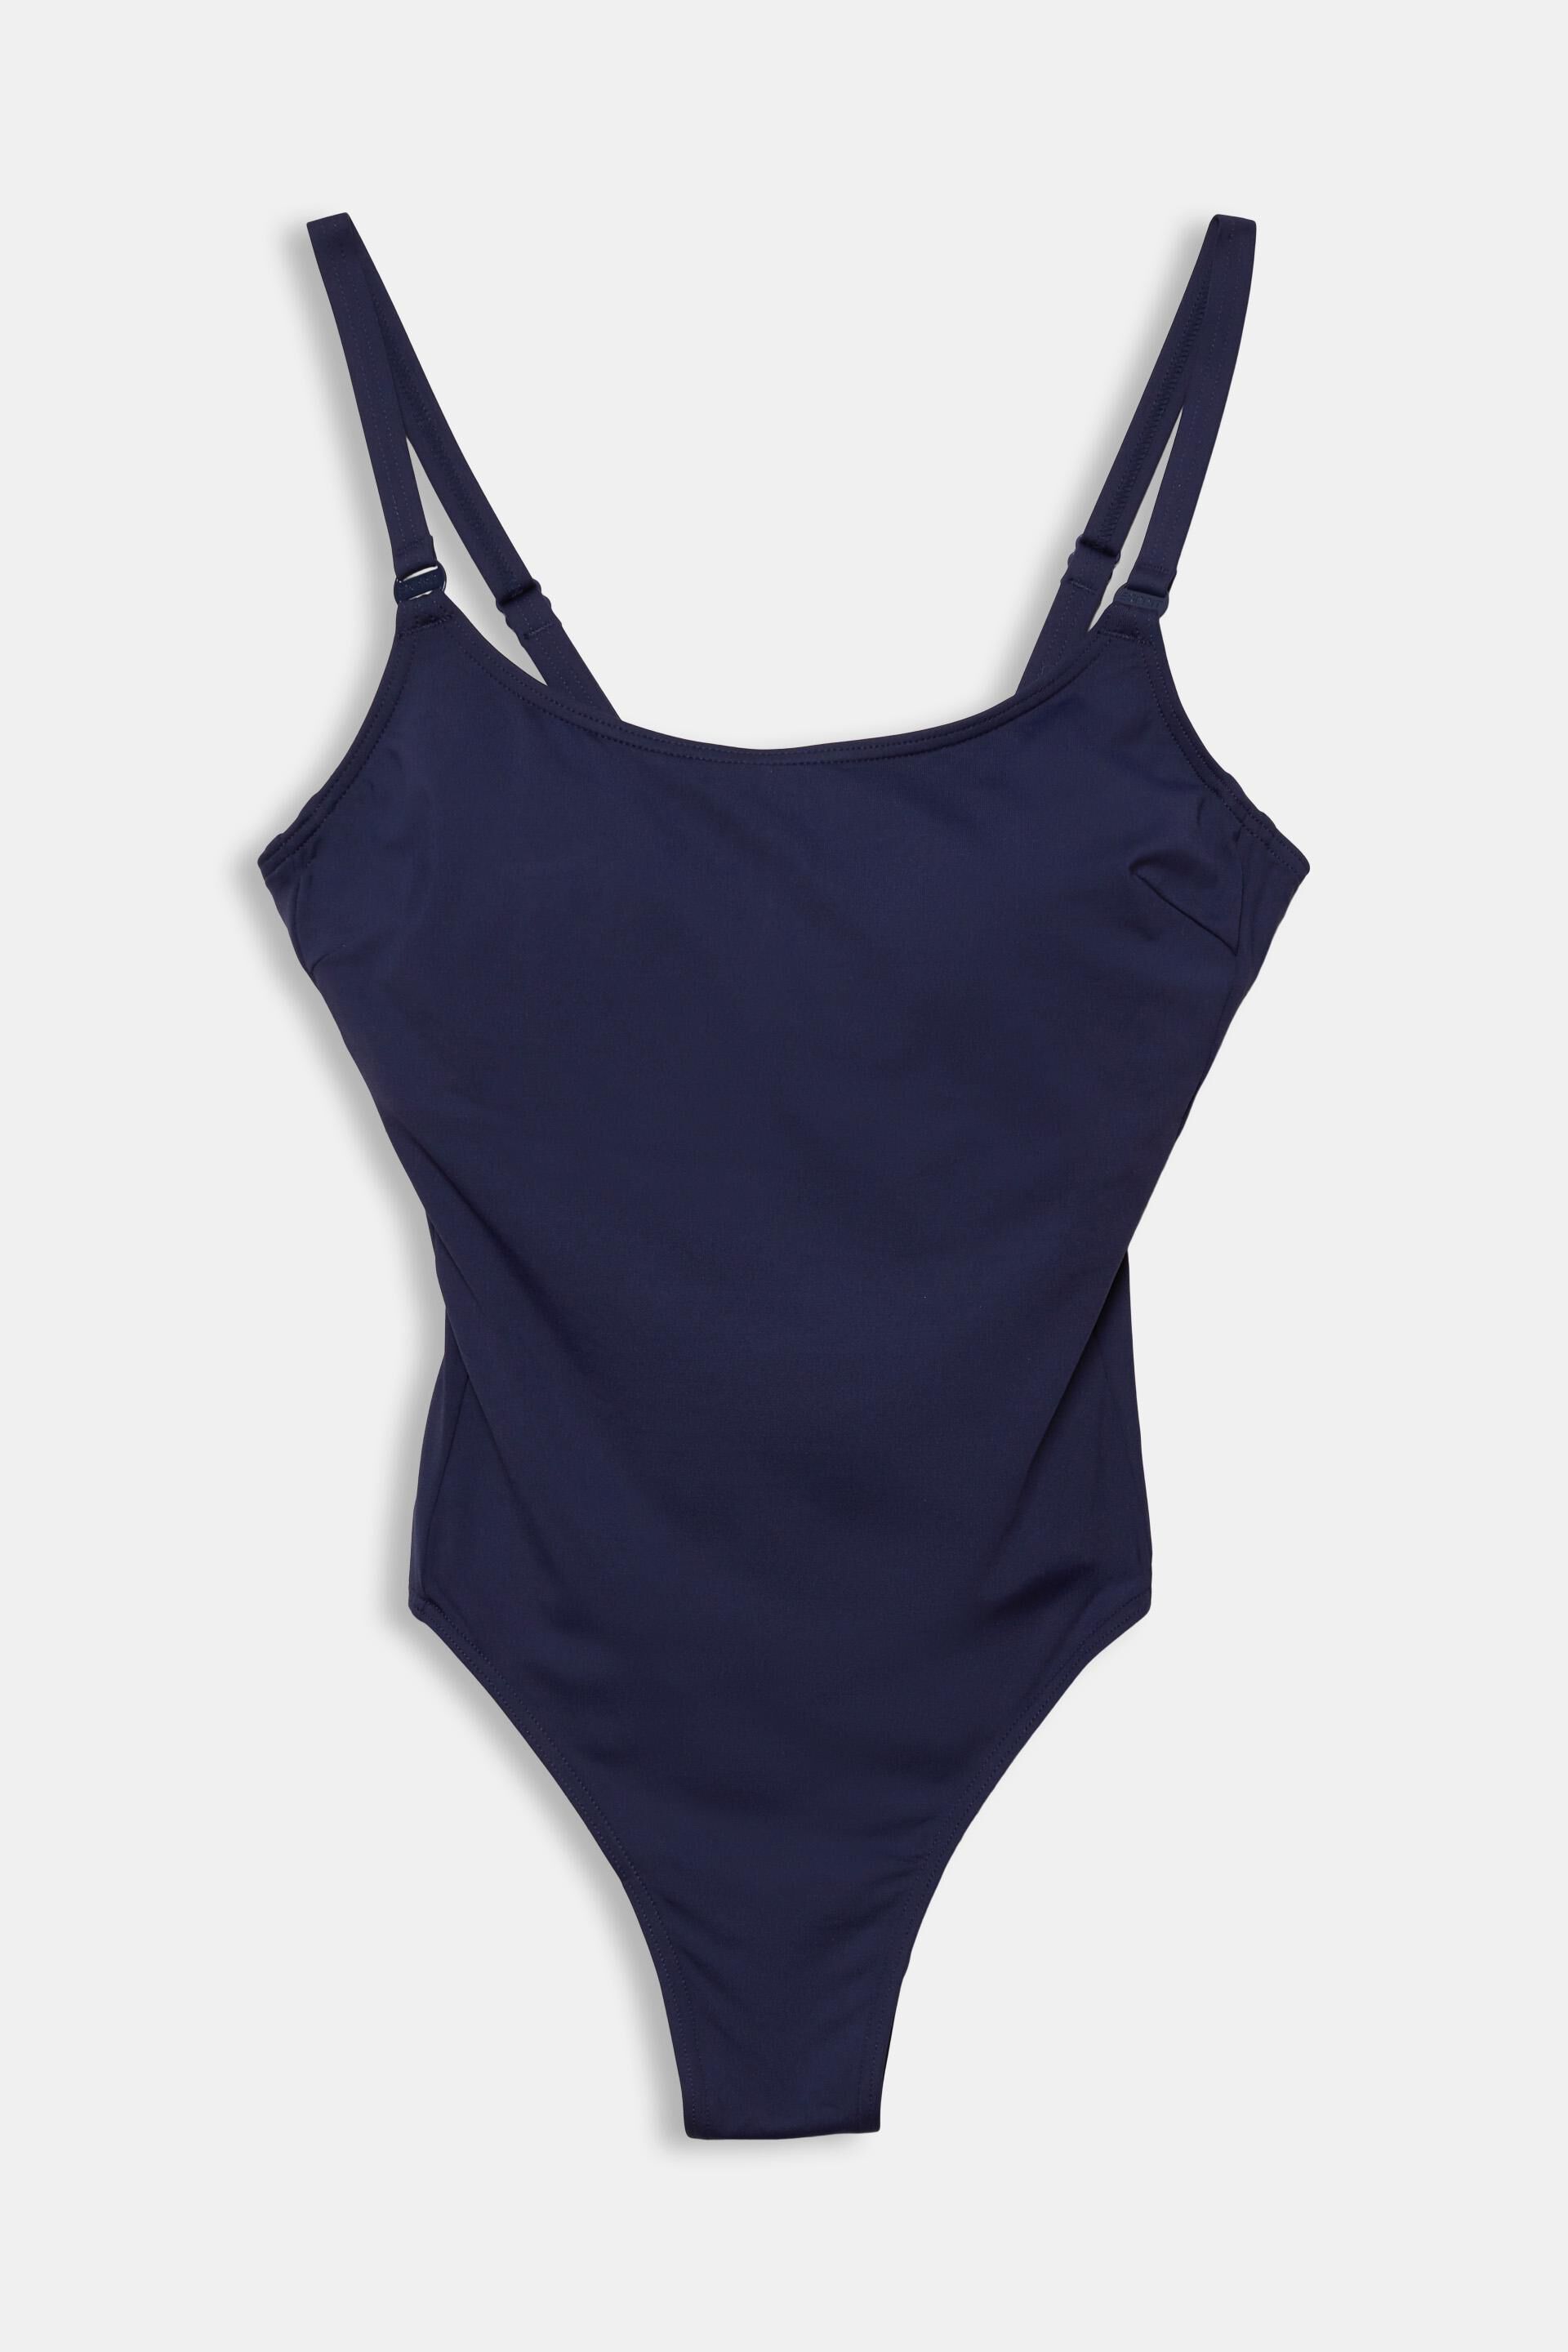 ESPRIT - Made of recycled material: unpadded swimsuit with underwiring at  our online shop